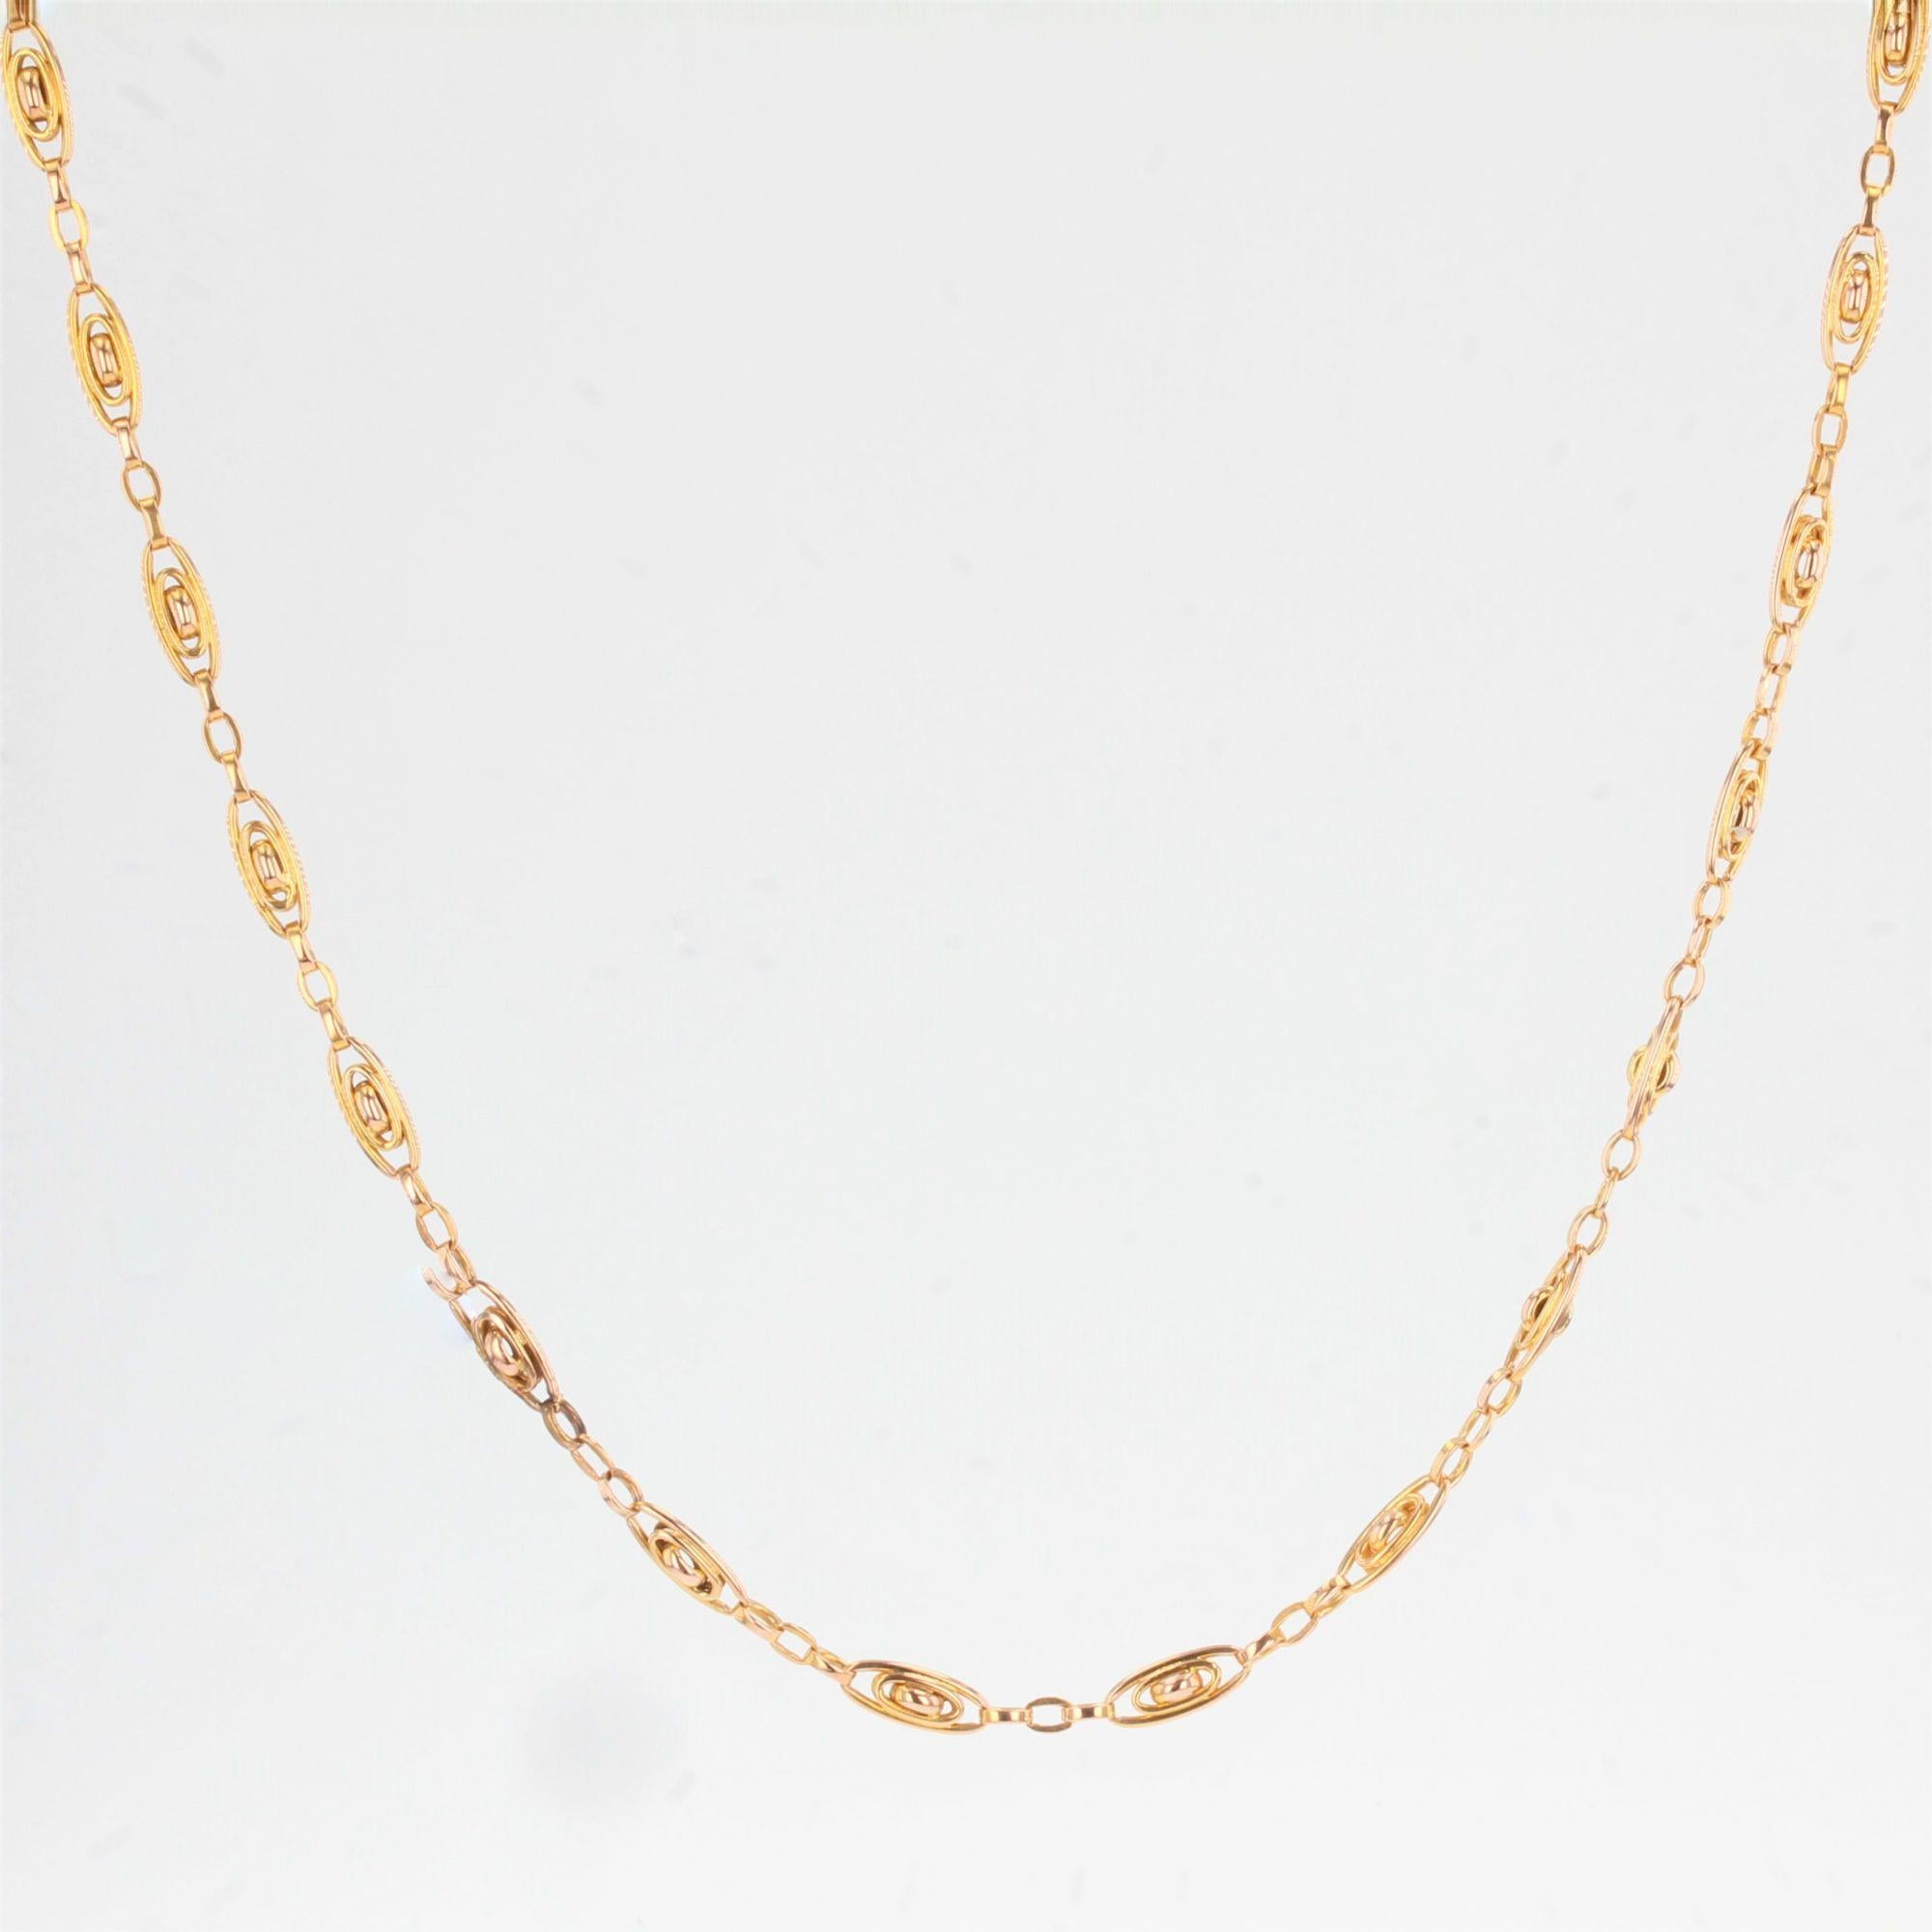 French 19th Century 18 Karat Rose Gold Watch Chain Necklace For Sale 5